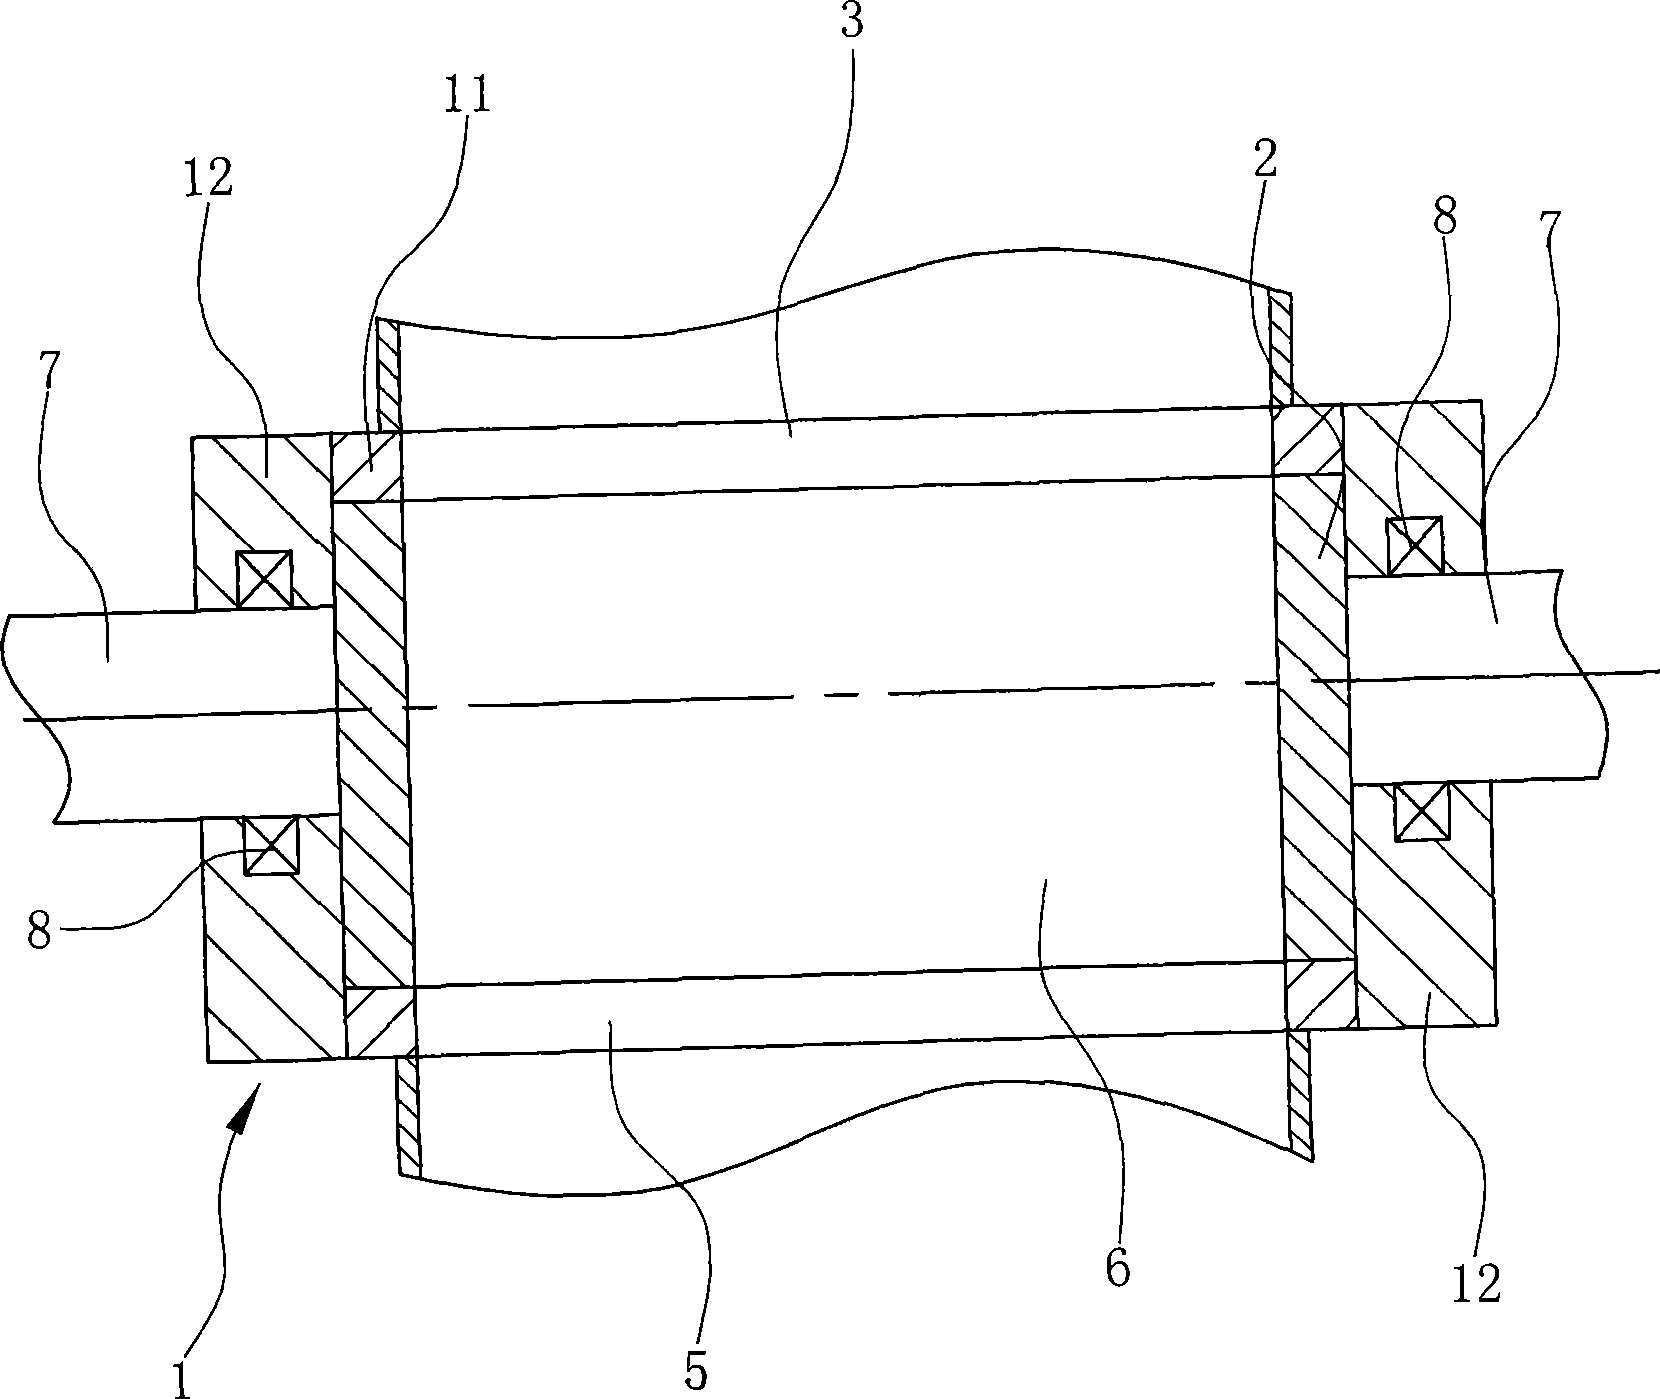 Totally-enclosed open type commutator